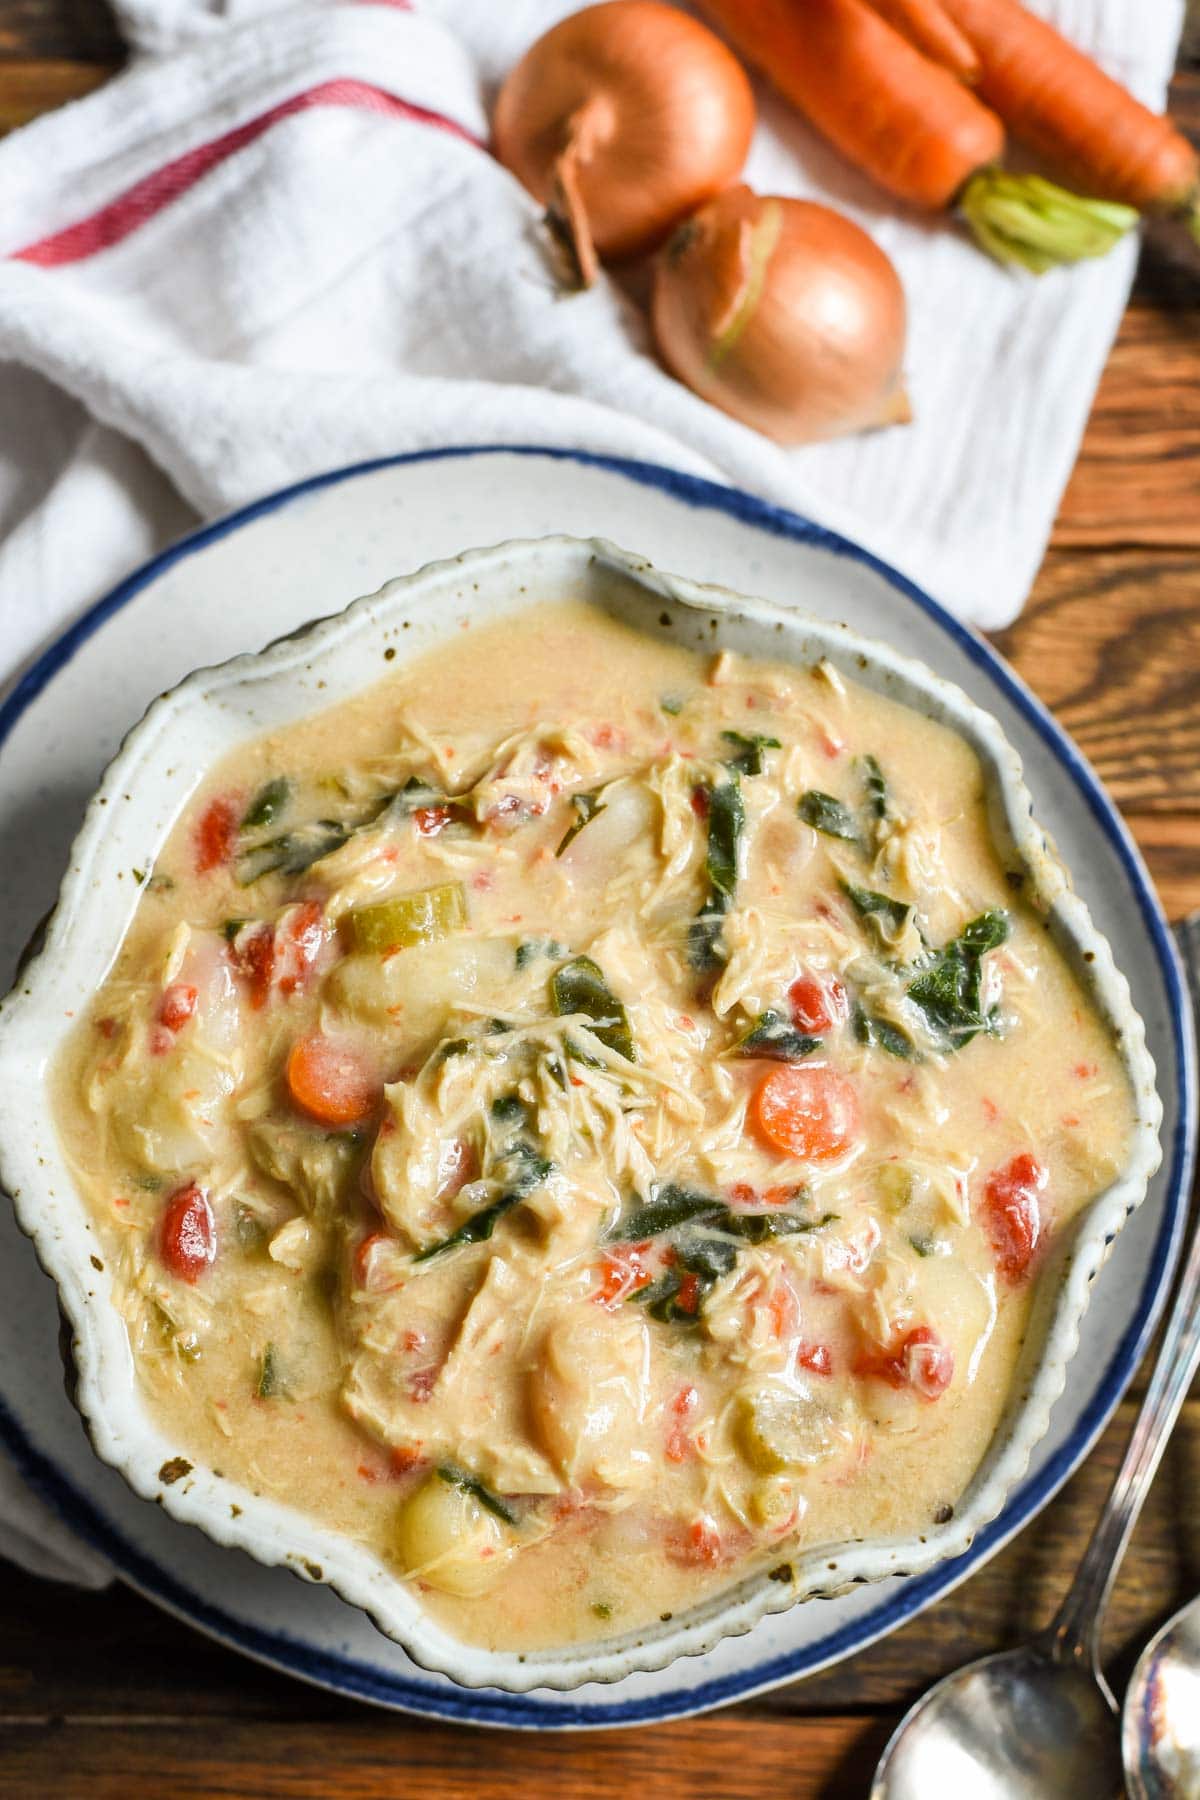 Looking for an easy healthy one pot meal? This creamy Crock Pot Chicken Gnocchi soup has all you need!